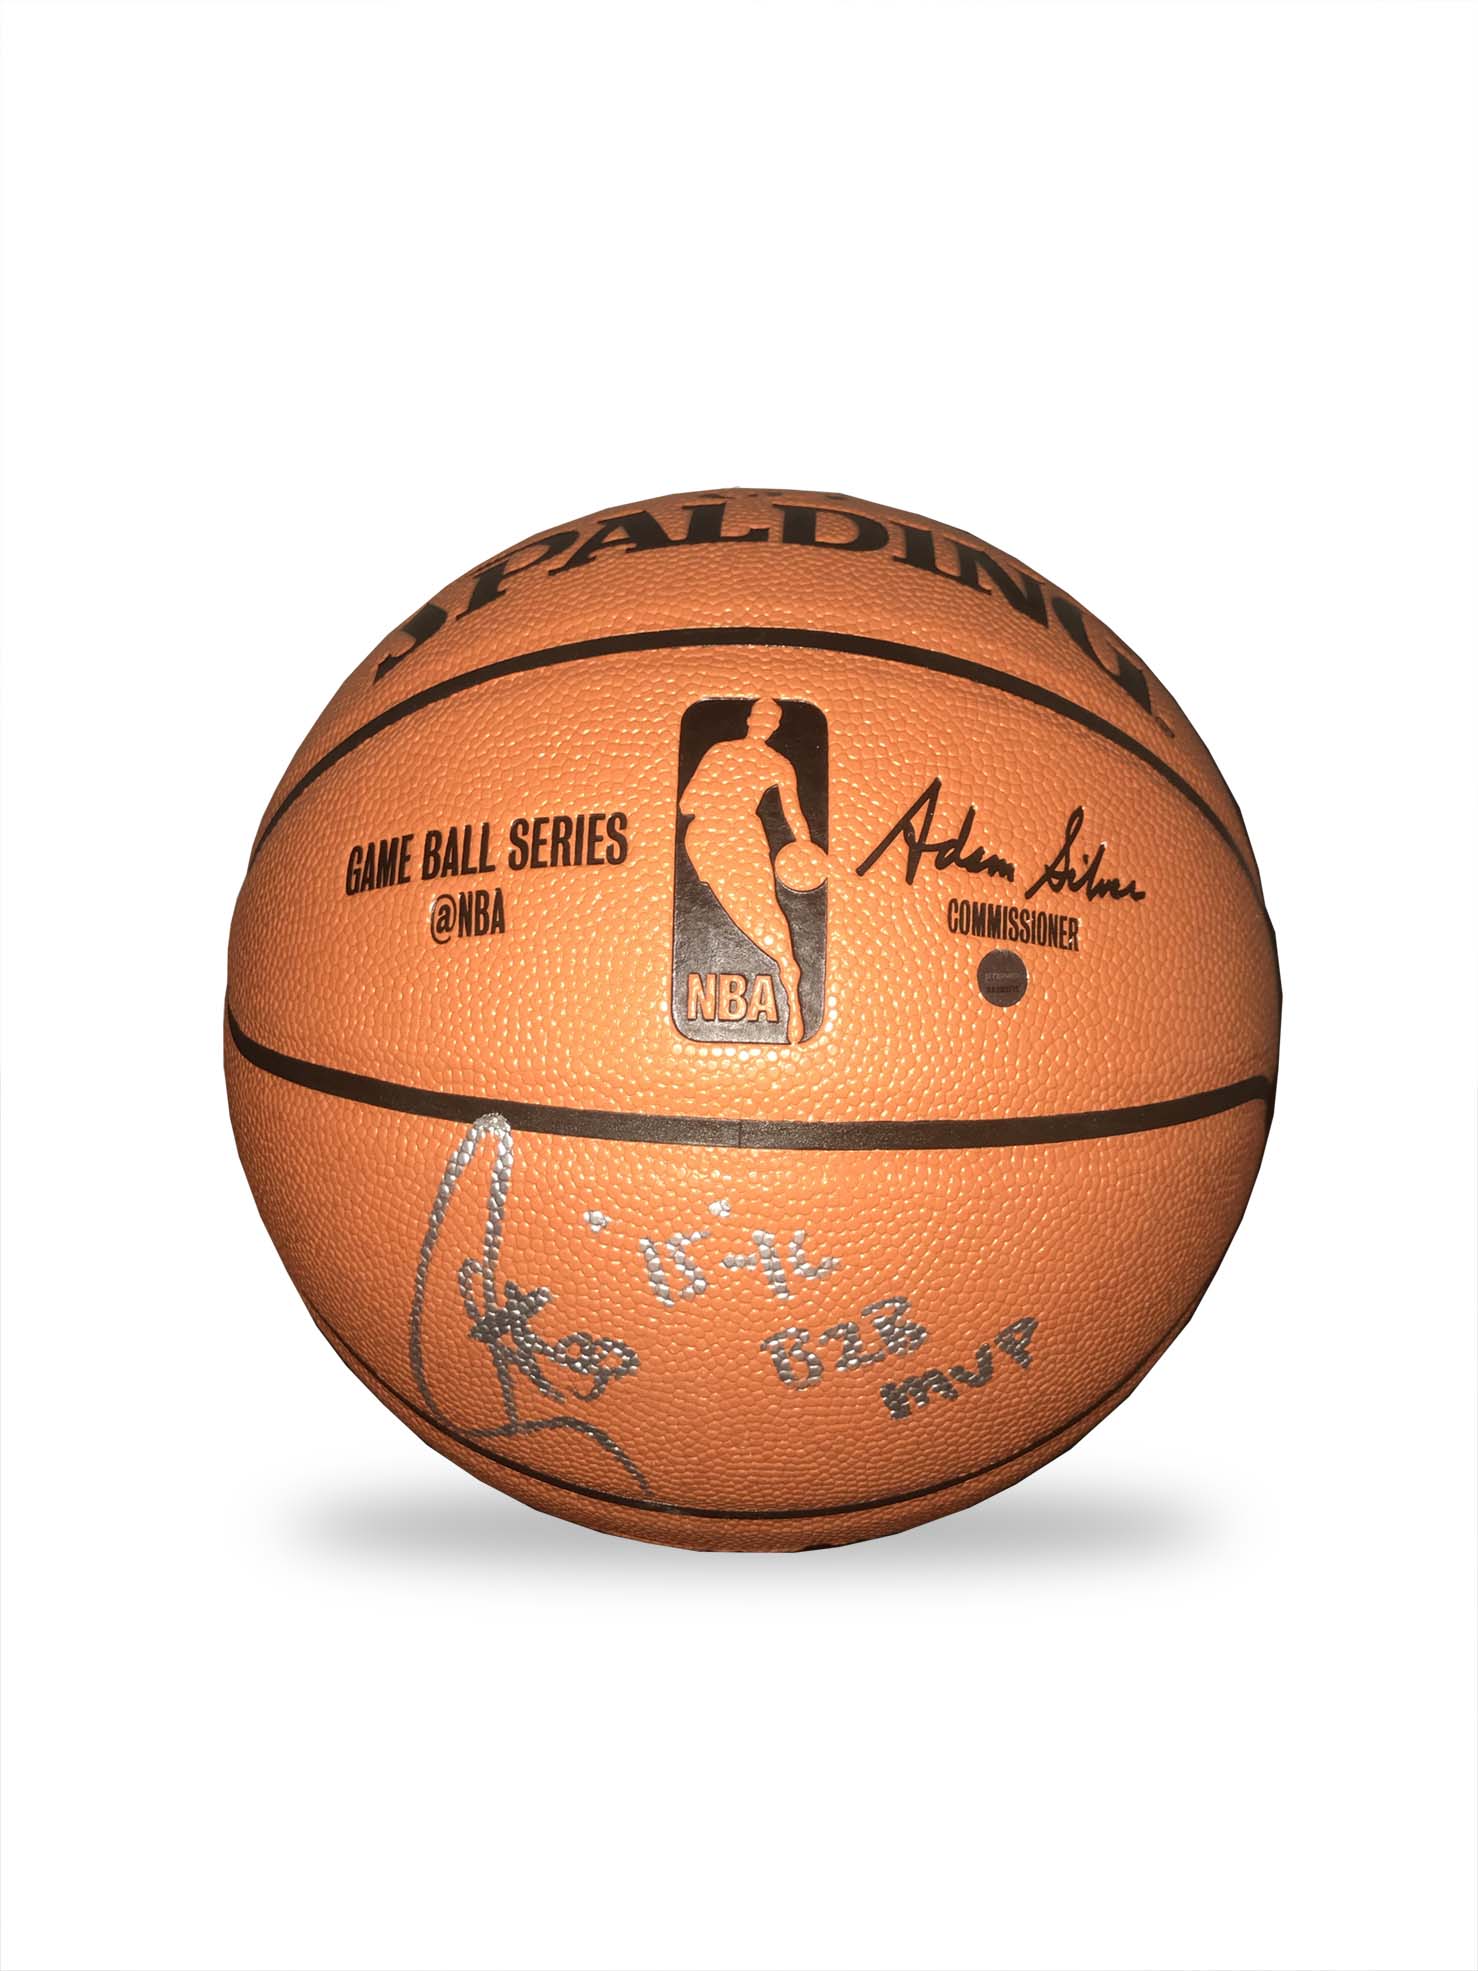 Signature Collectibles STEPHEN CURRY AUTOGRAPHED HAND SIGNED